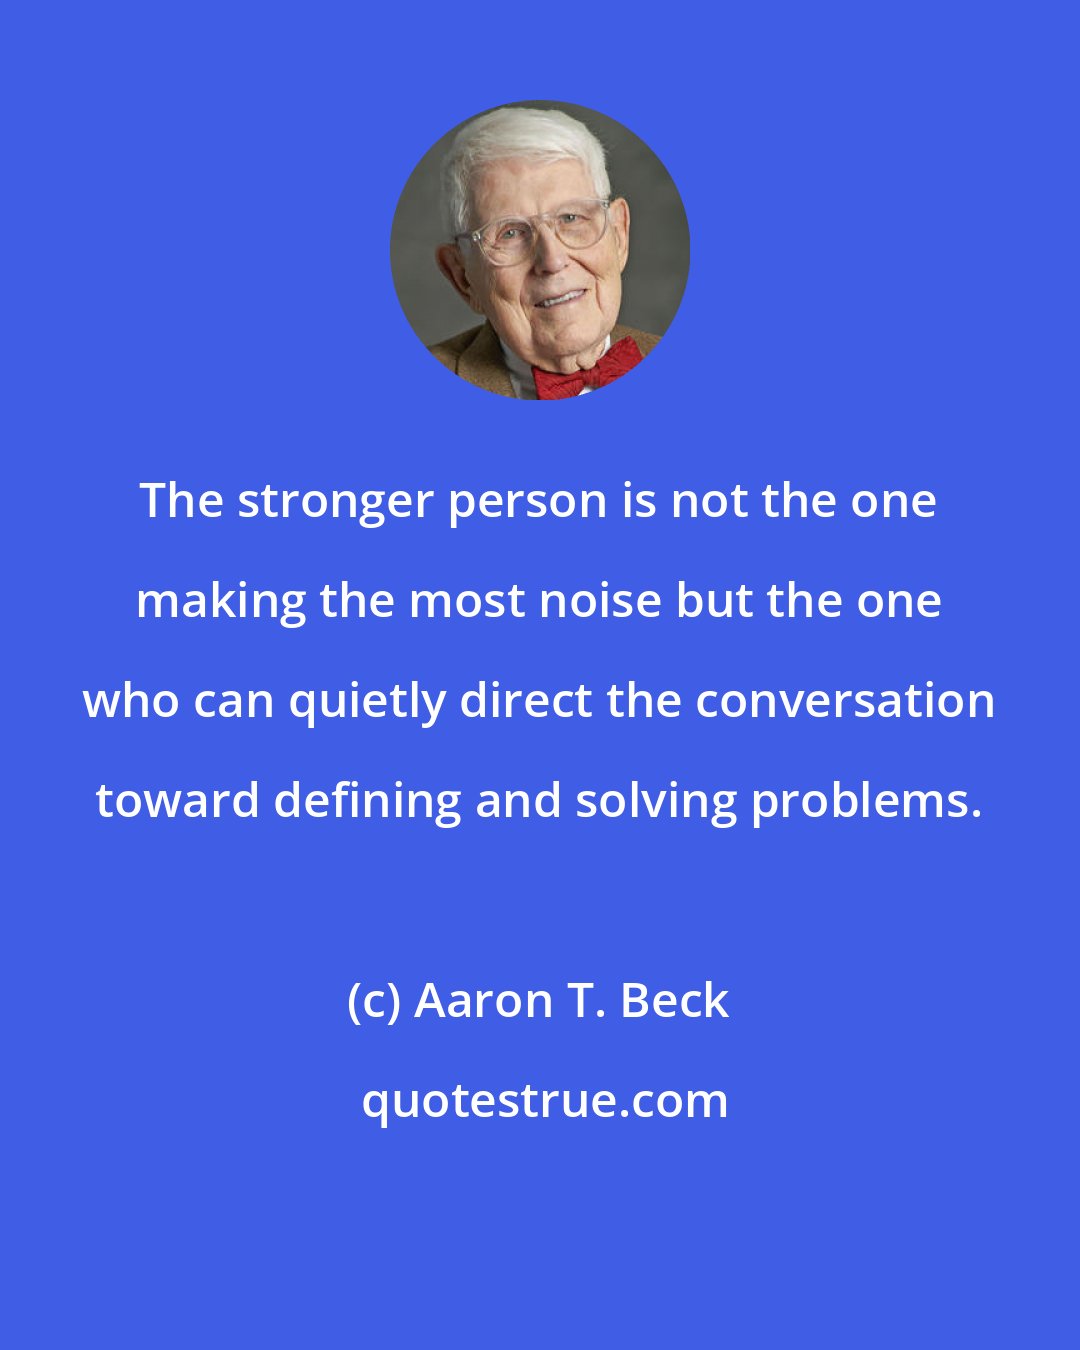 Aaron T. Beck: The stronger person is not the one making the most noise but the one who can quietly direct the conversation toward defining and solving problems.